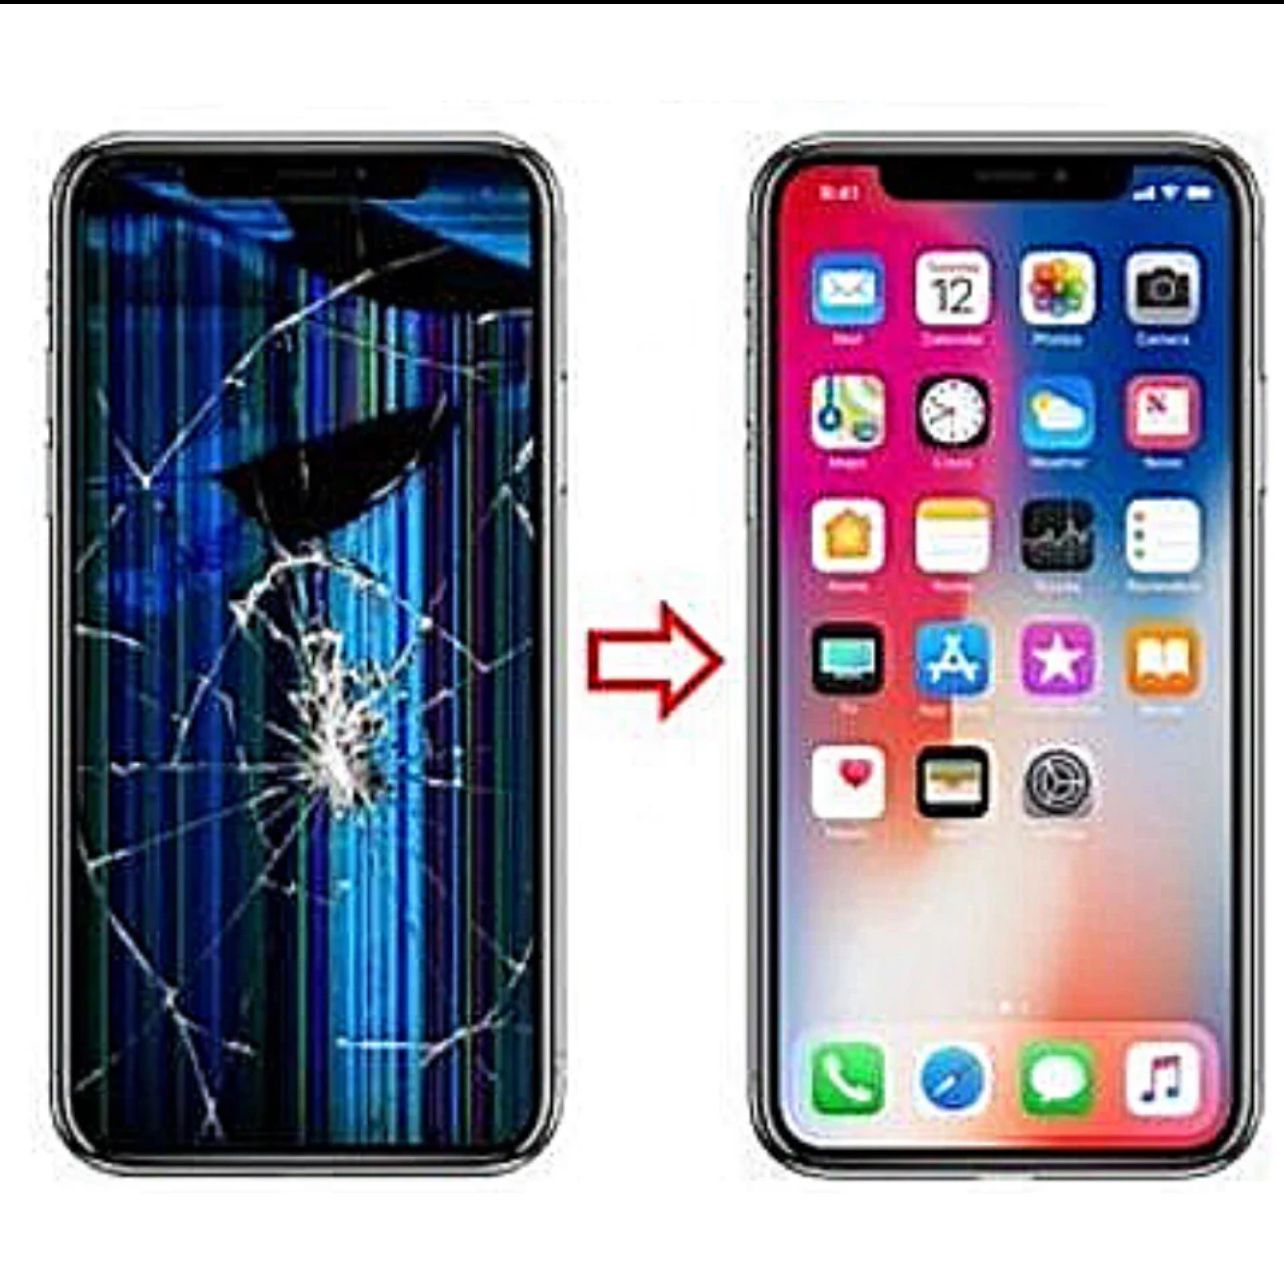 We Can Change Your Screen In 10 Minutes, 19 Plus Part 